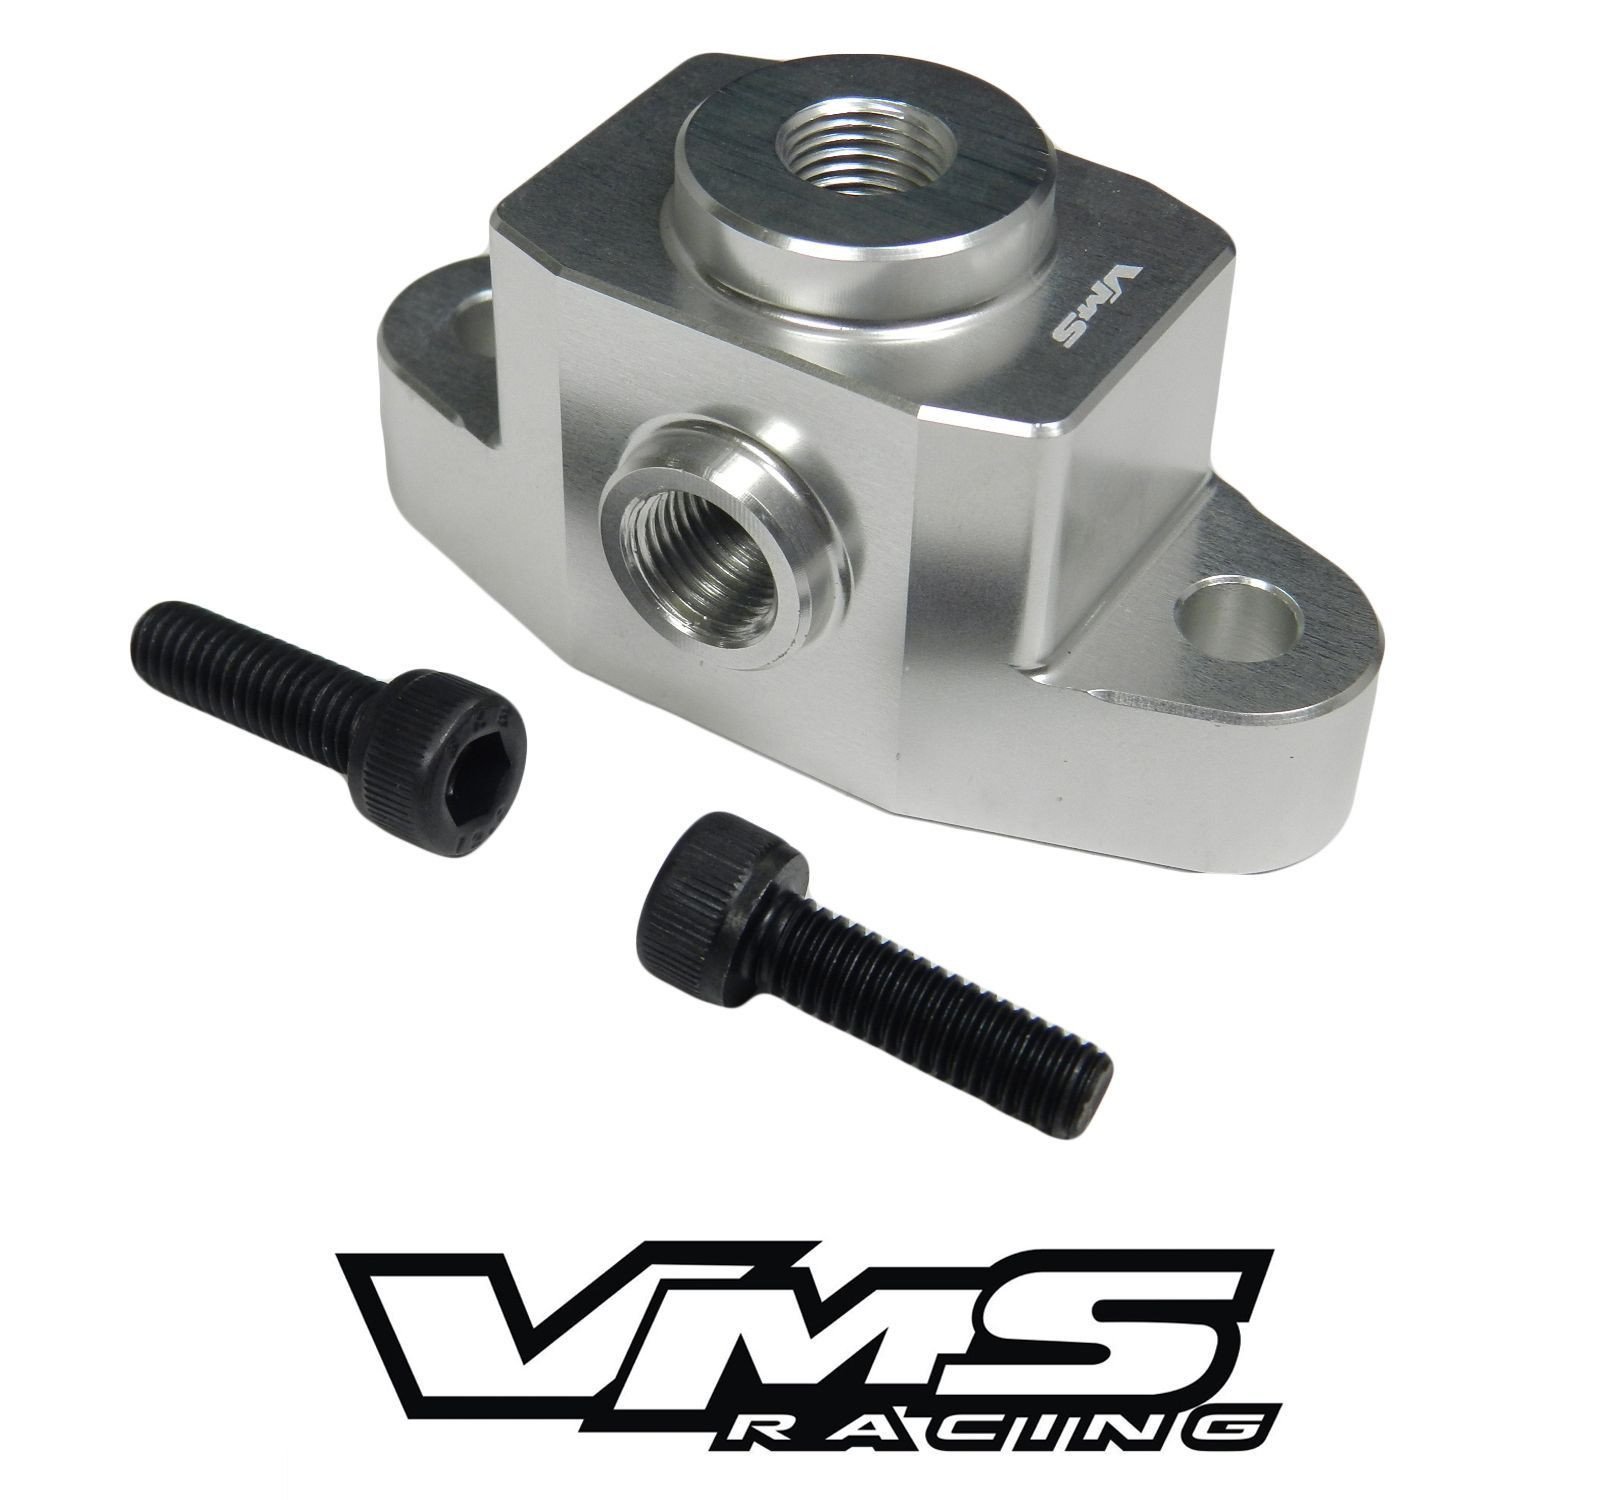 VMS Racing Oil Pan Union Adapter for all LS Style Engines  LS1, LS2, LS3, LS6, LS7 Wet Sump, LSX engine